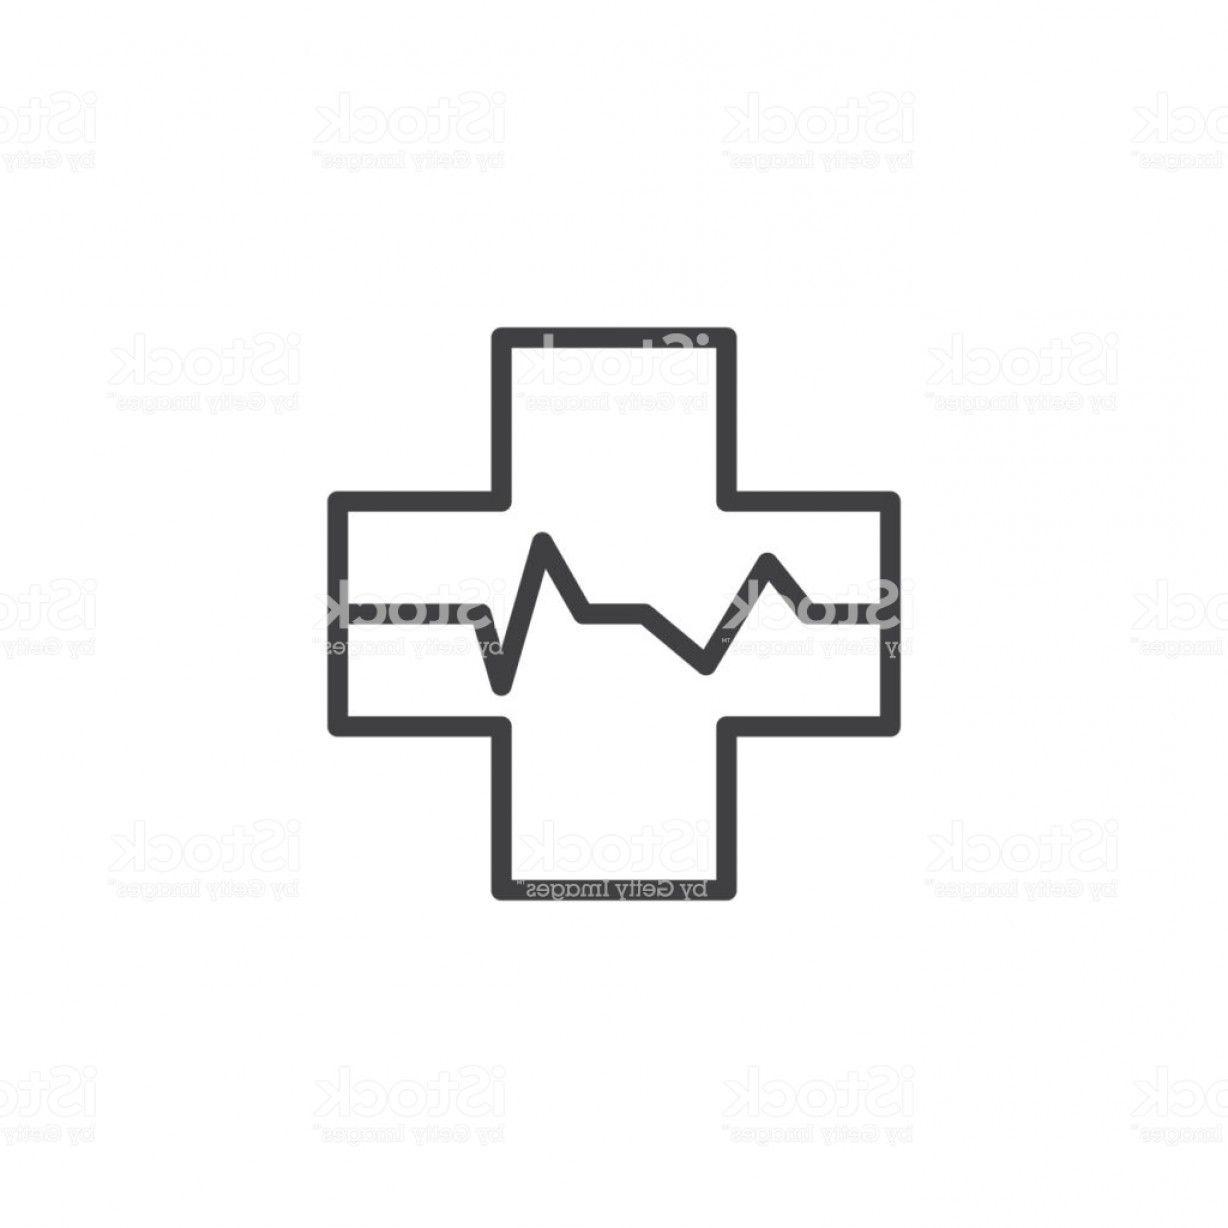 Black and White Medical Cross Logo - Medical Cross With Heart Beat Outline Icon Gm | SOIDERGI